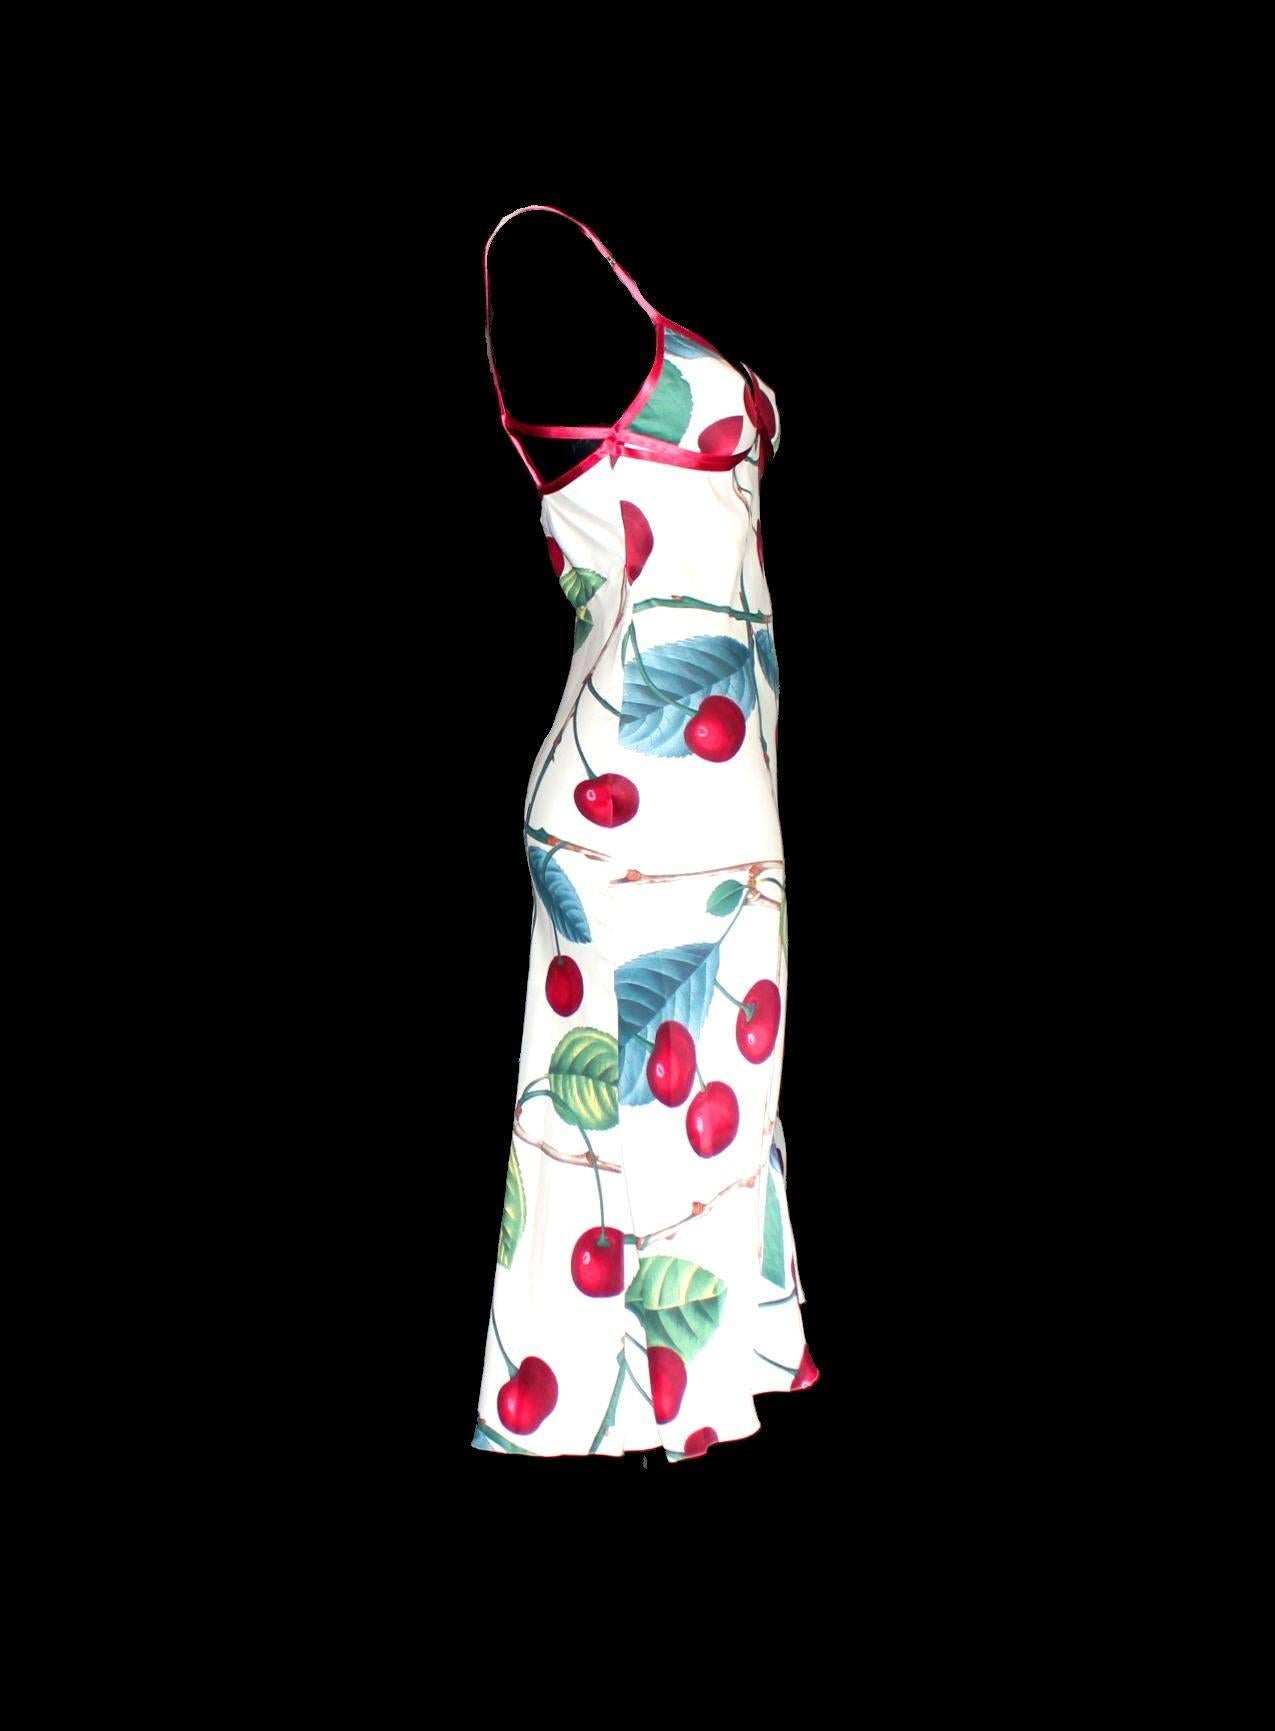 Stunning John Galliano Dress from his famous 2003 collection
Finest silk with cherry print
Signature silk buttons on side
Simply slips on
Made in France
Dry Clean Only